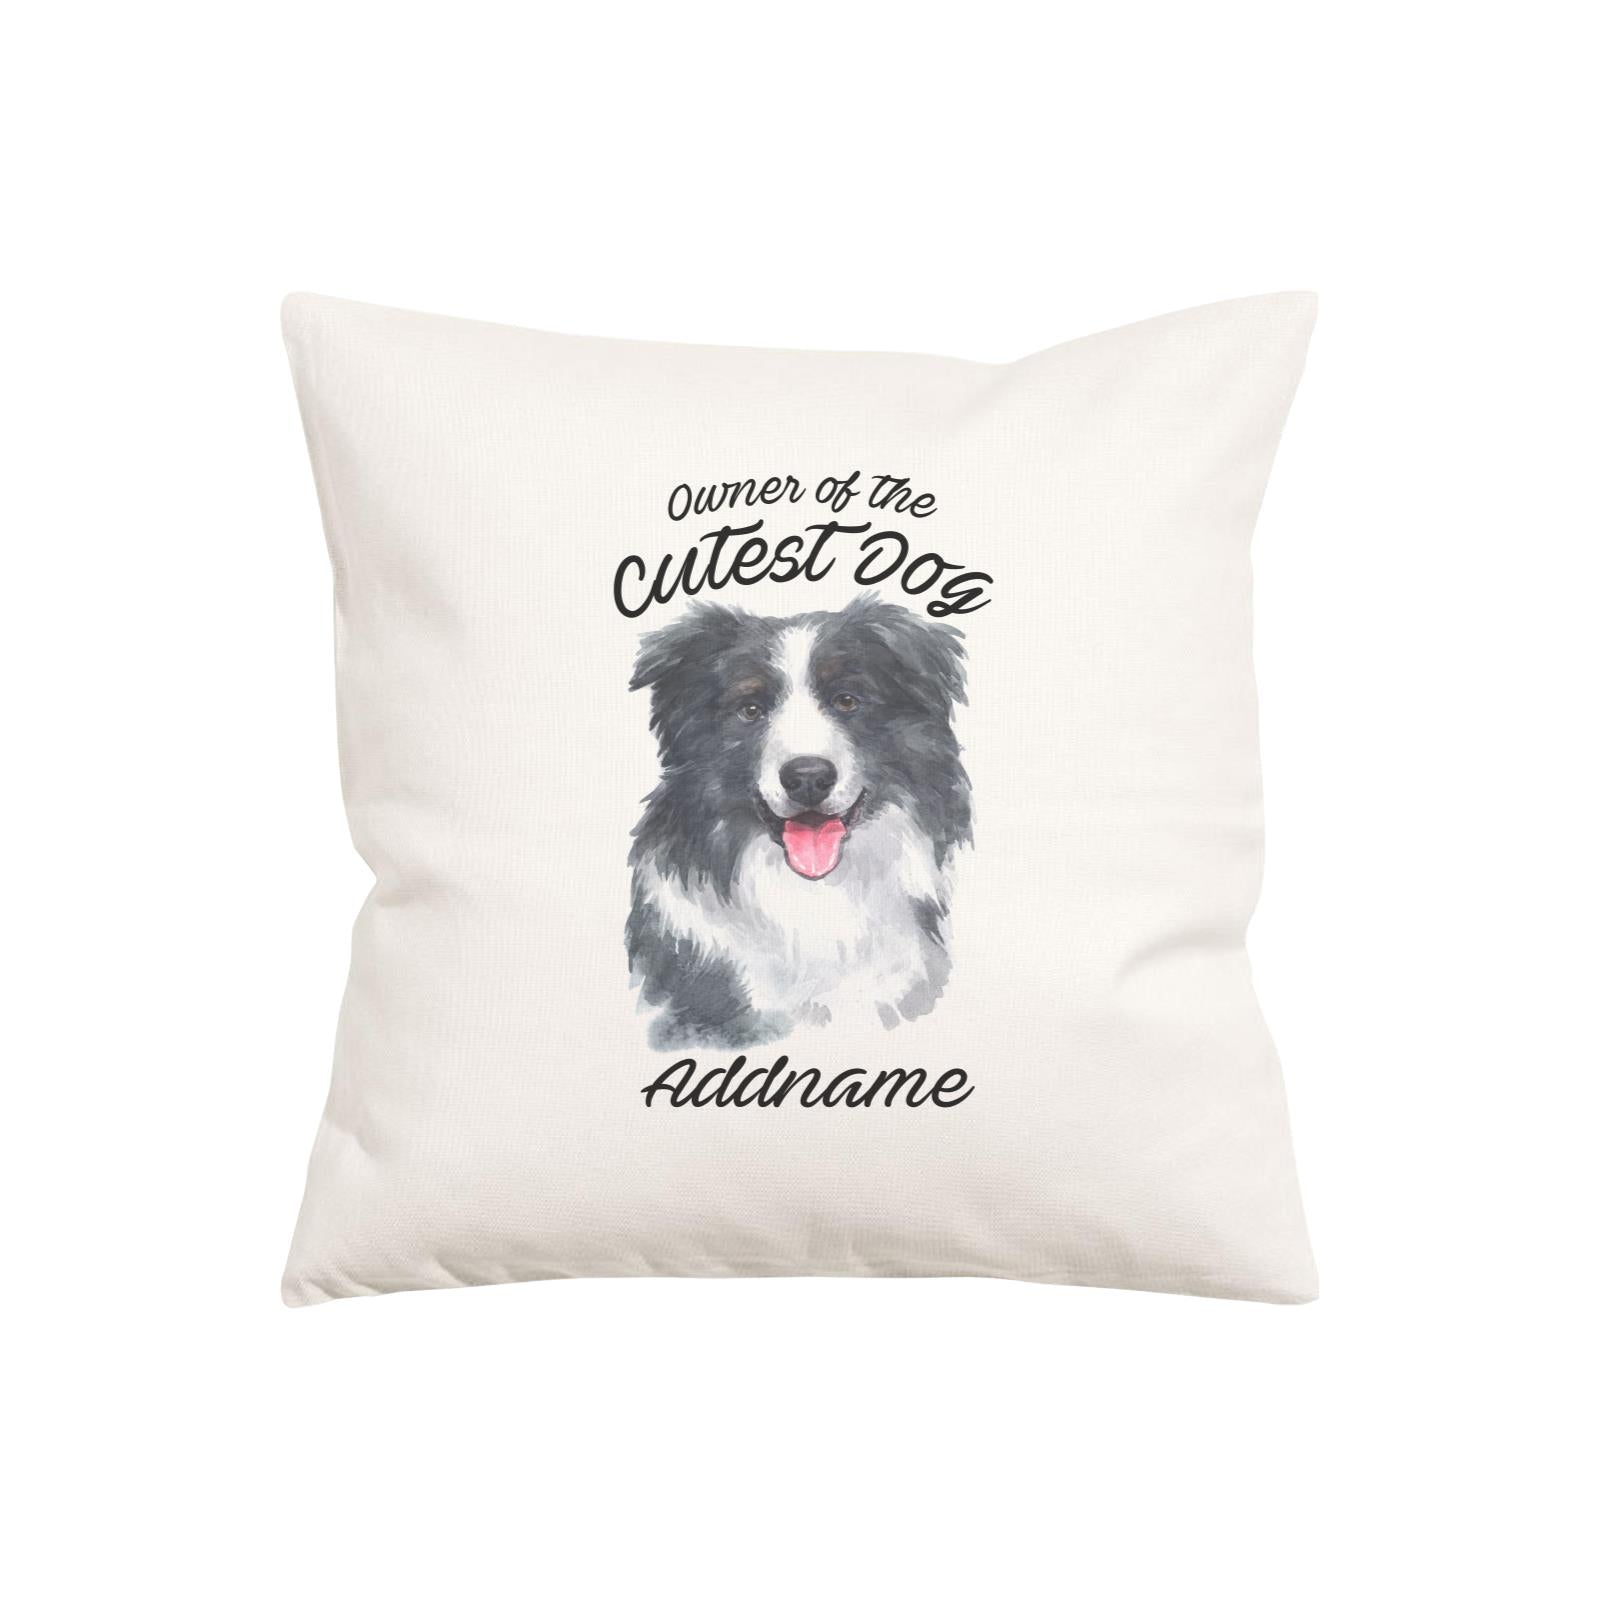 Watercolor Dog Owner Of The Cutest Dog Border Collie Addname Pillow Cushion